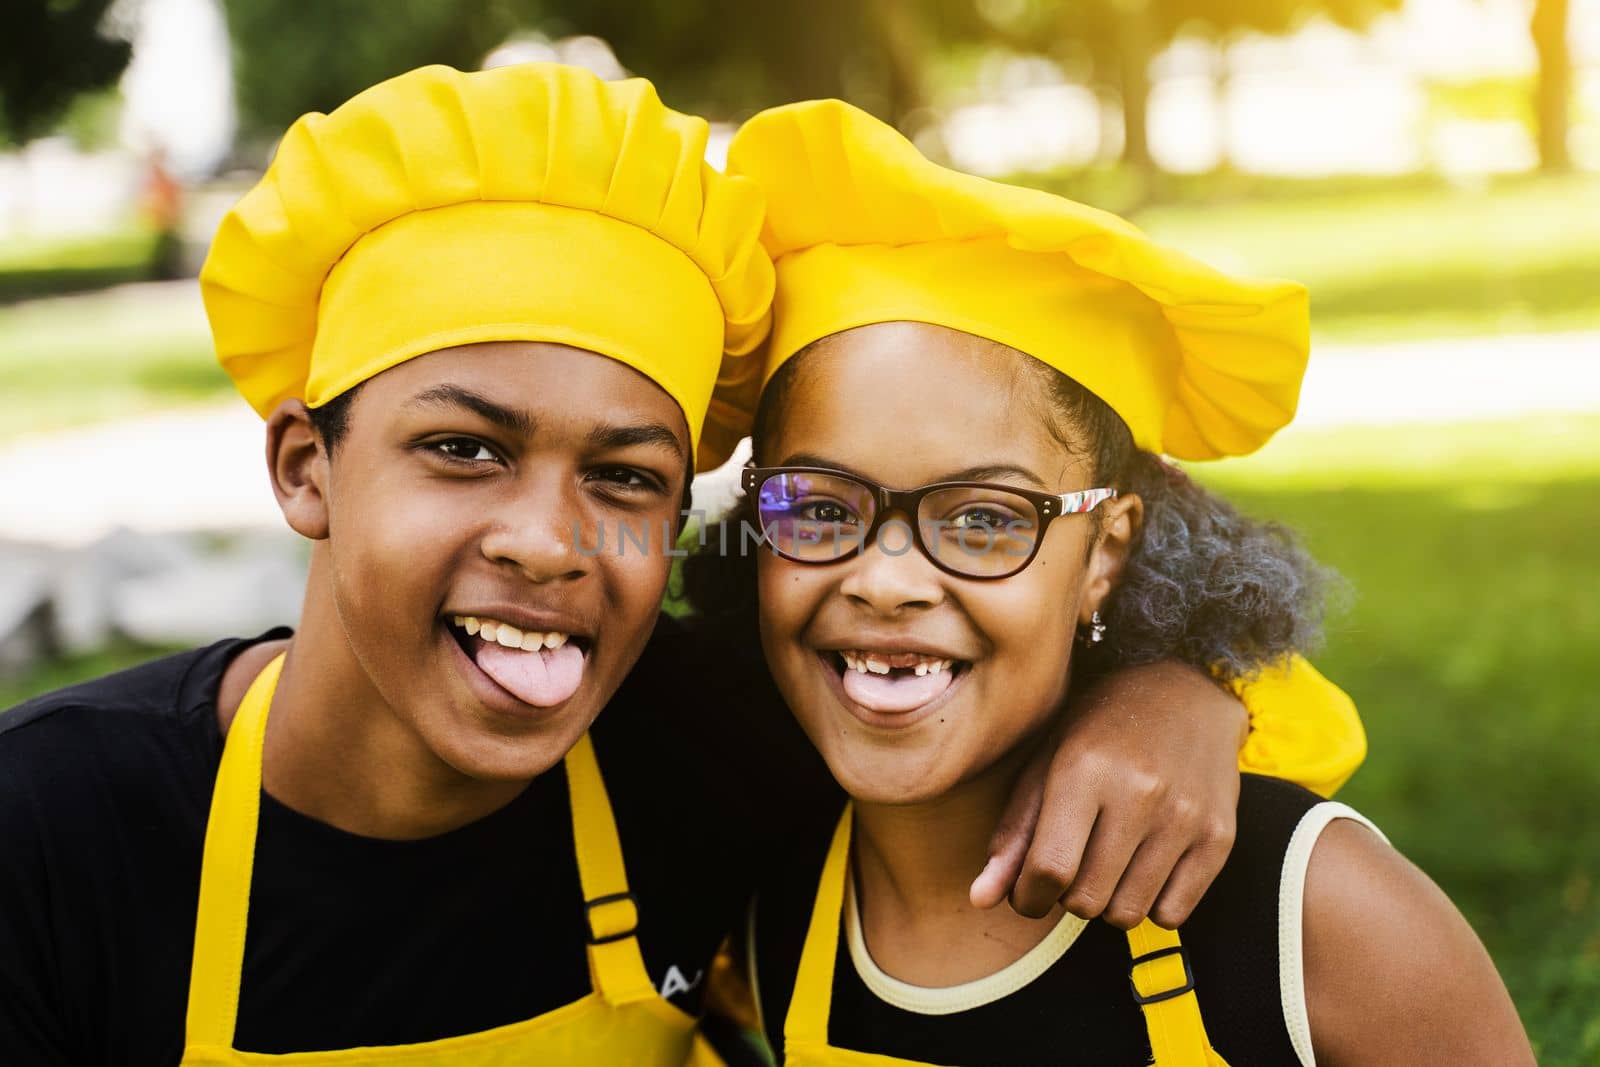 African children cooks in chefs hat and yellow uniforms grimacing and showing tongue each others. African teenager and black girl have fun and cook food